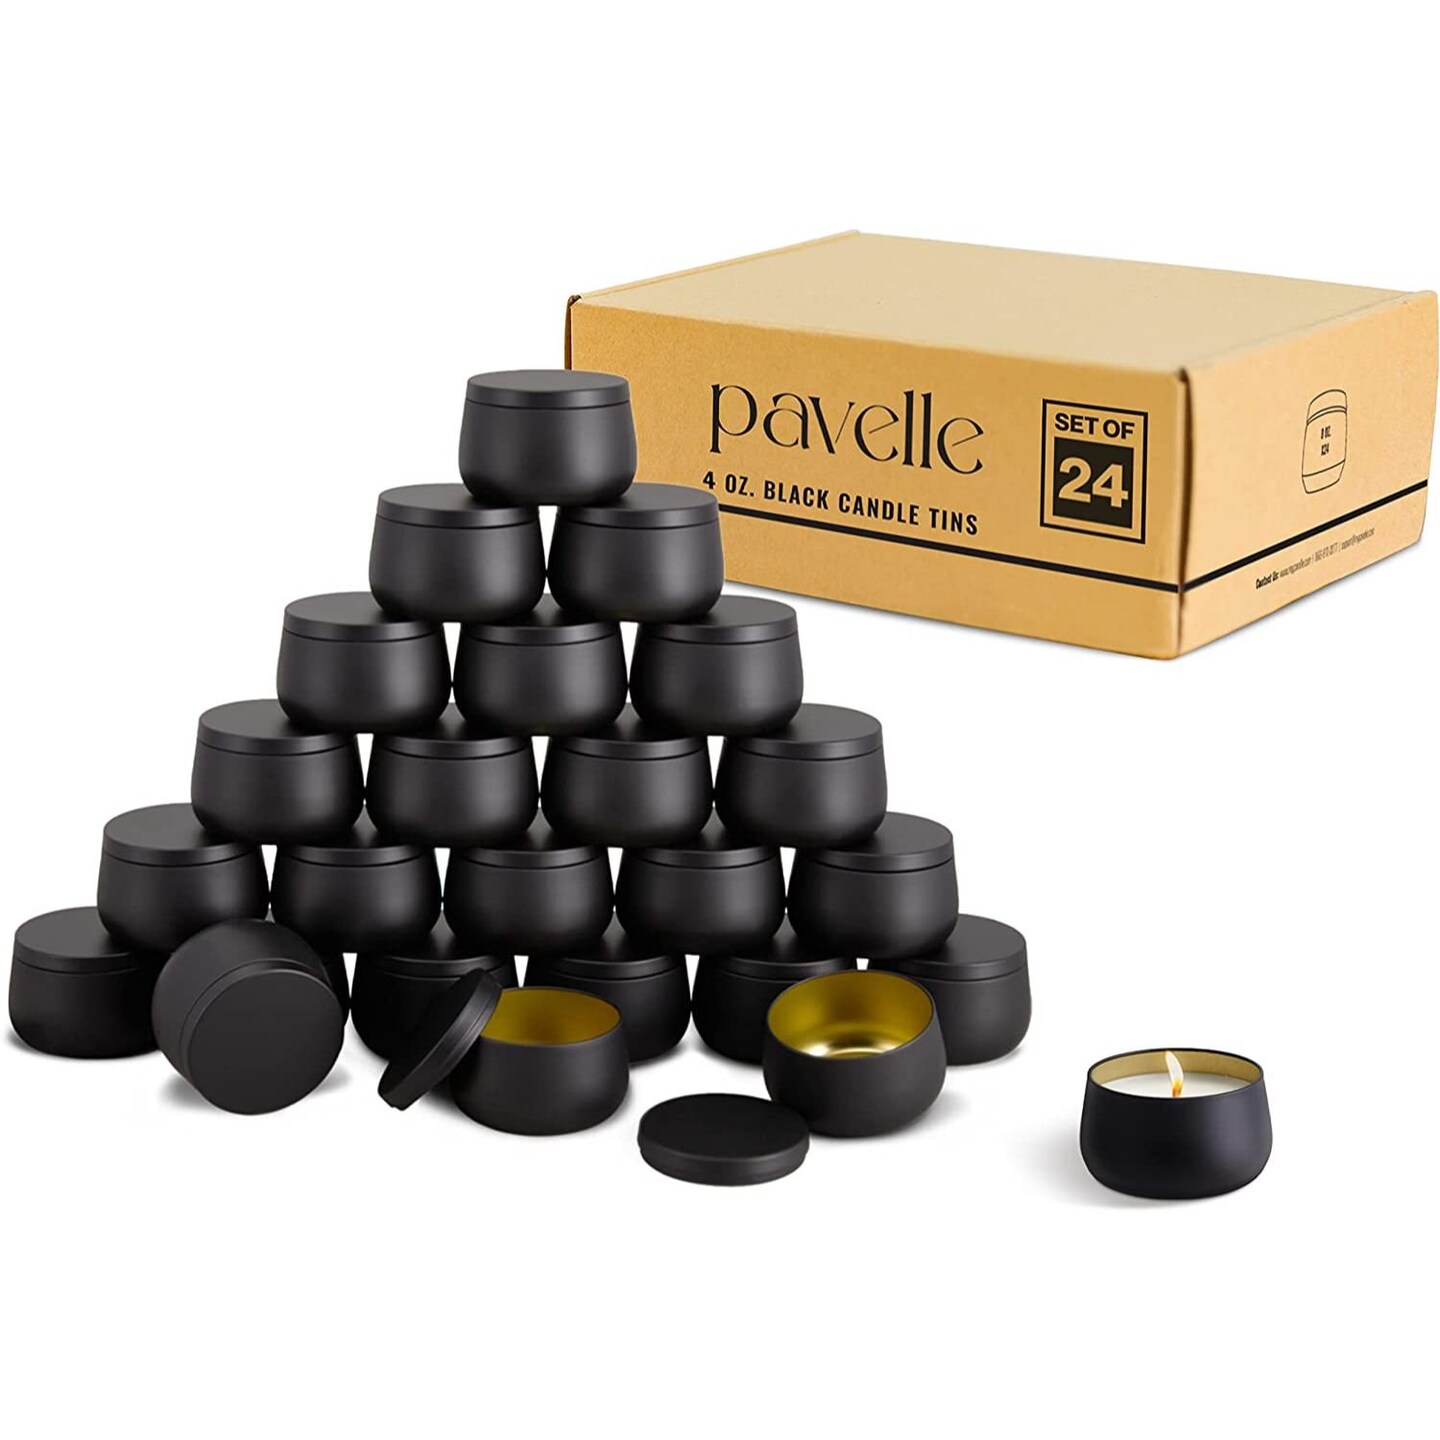 Pavelle Black Candle Container Tins, 24 Metal Tin Containers with